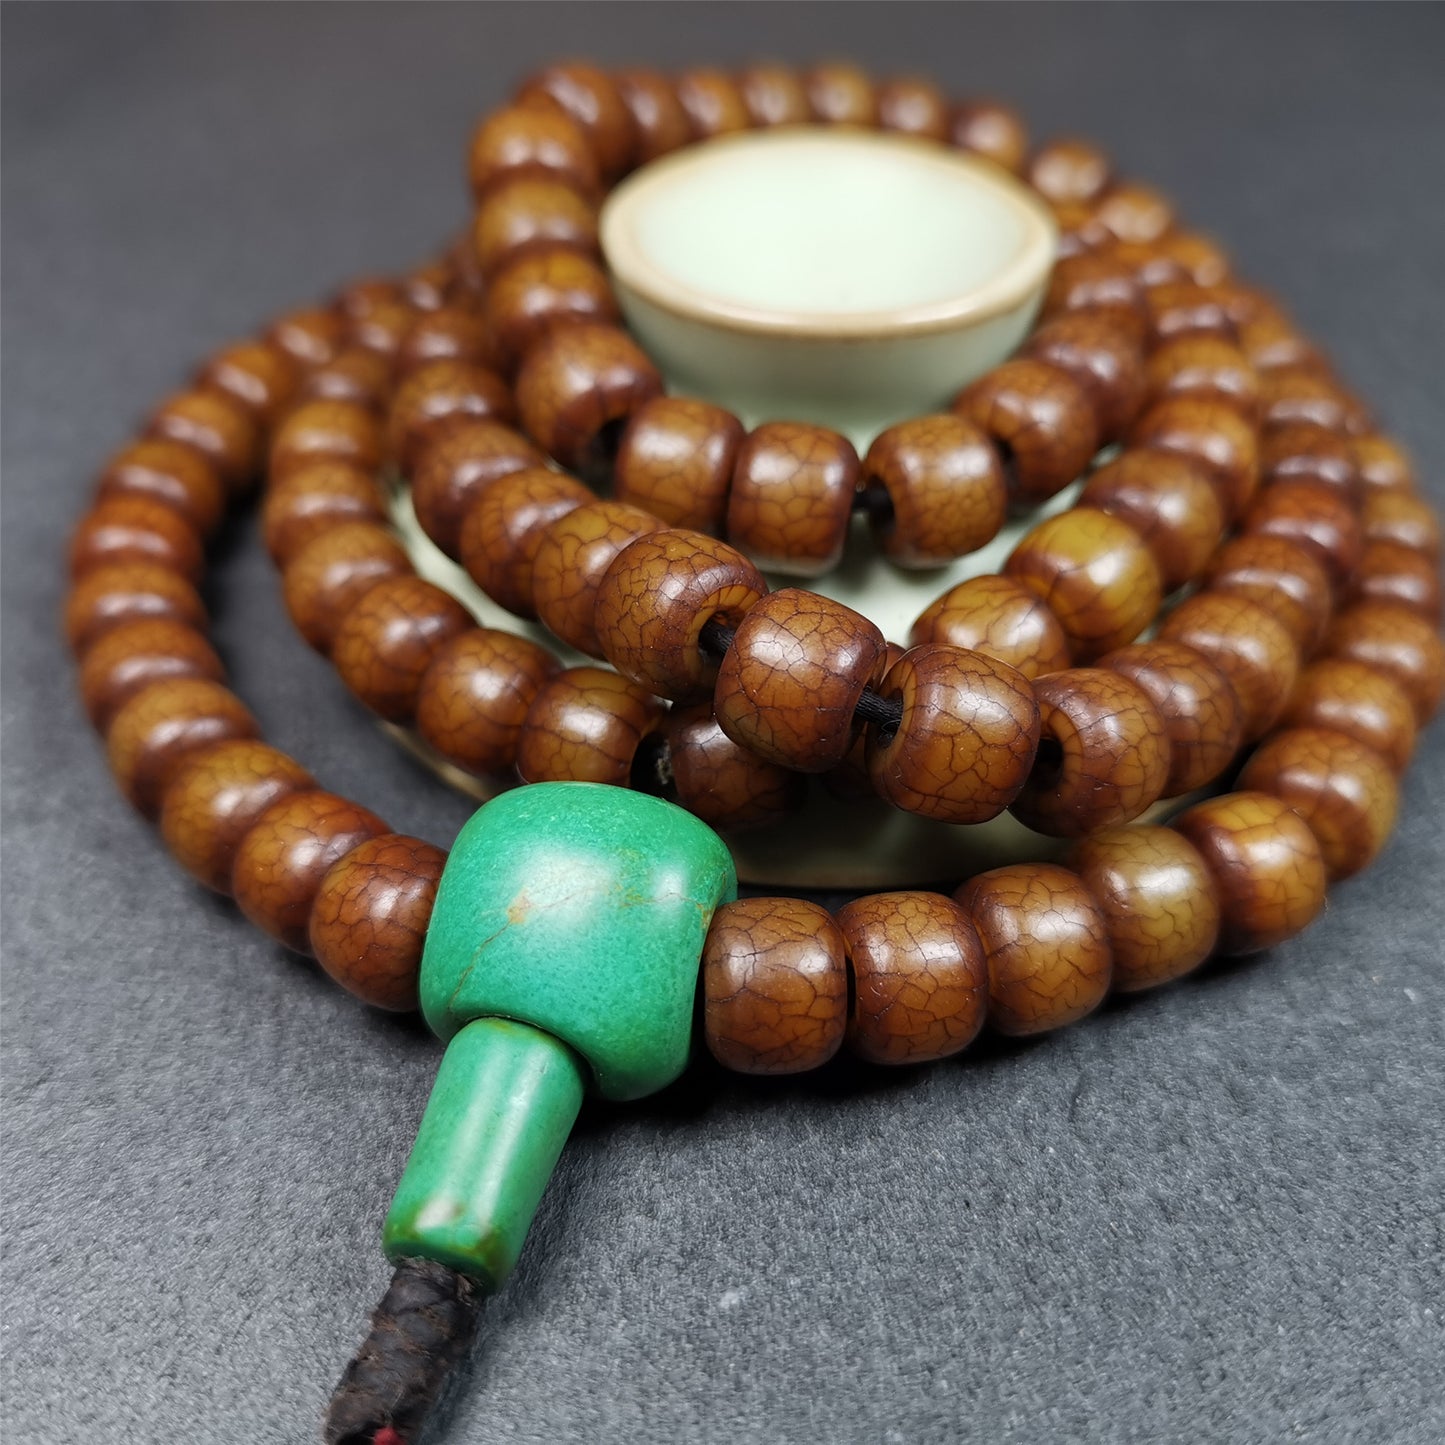 This mala was made by Tibetan craftsmen.  It is made of Corypha Linn Seeds, diameter of 10mm,0.4 inch,circumference is 80cm,32 inches , end of a turquoise guru bead.